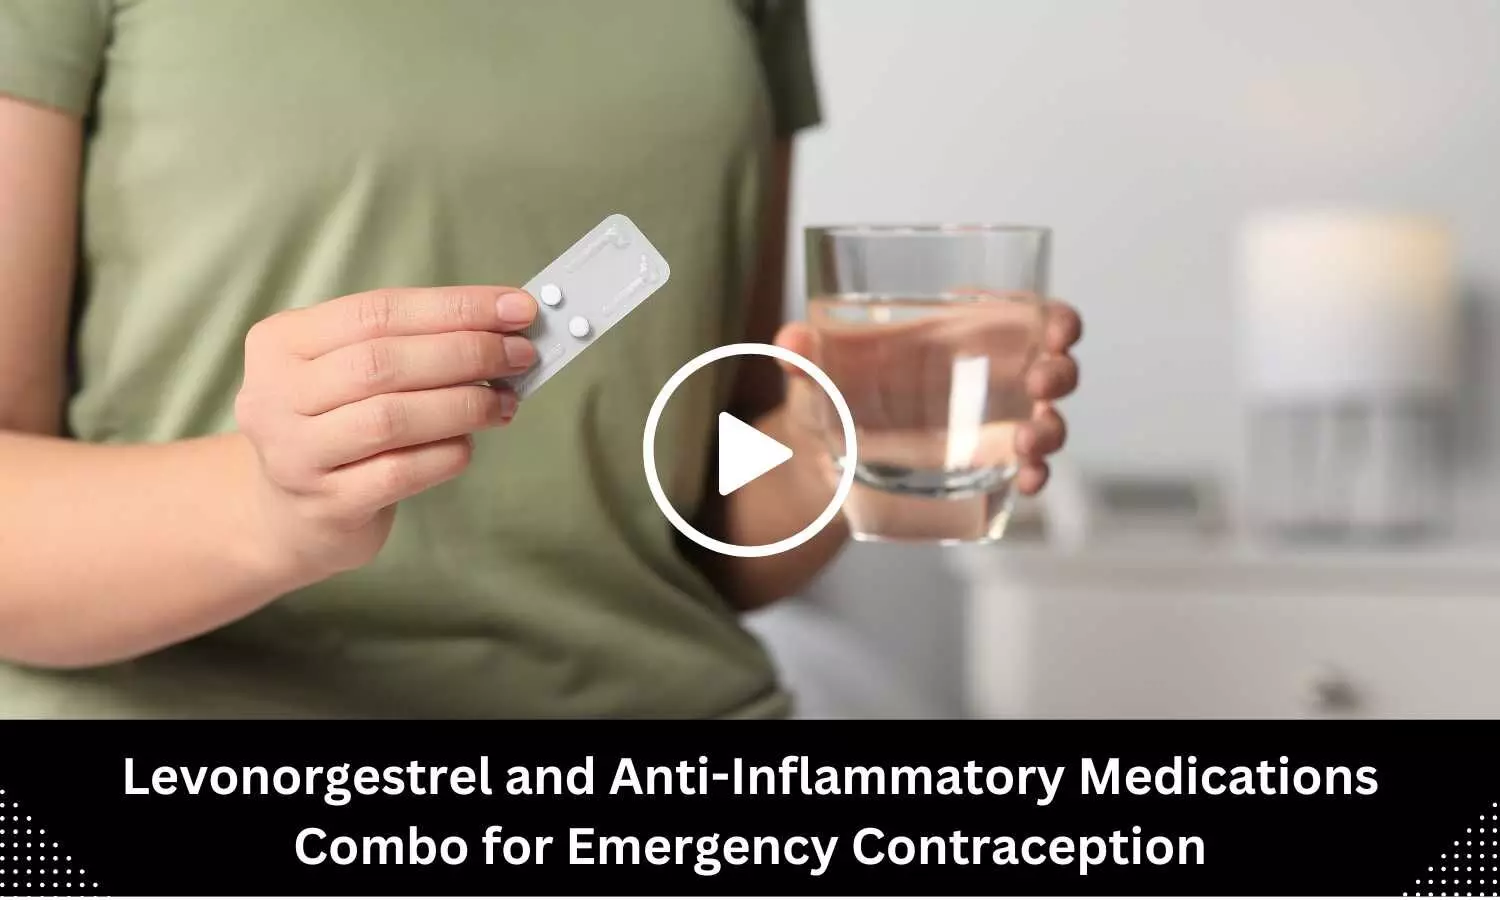 Levonorgestrel and Anti-Inflammatory Medications Combo for Emergency Contraception